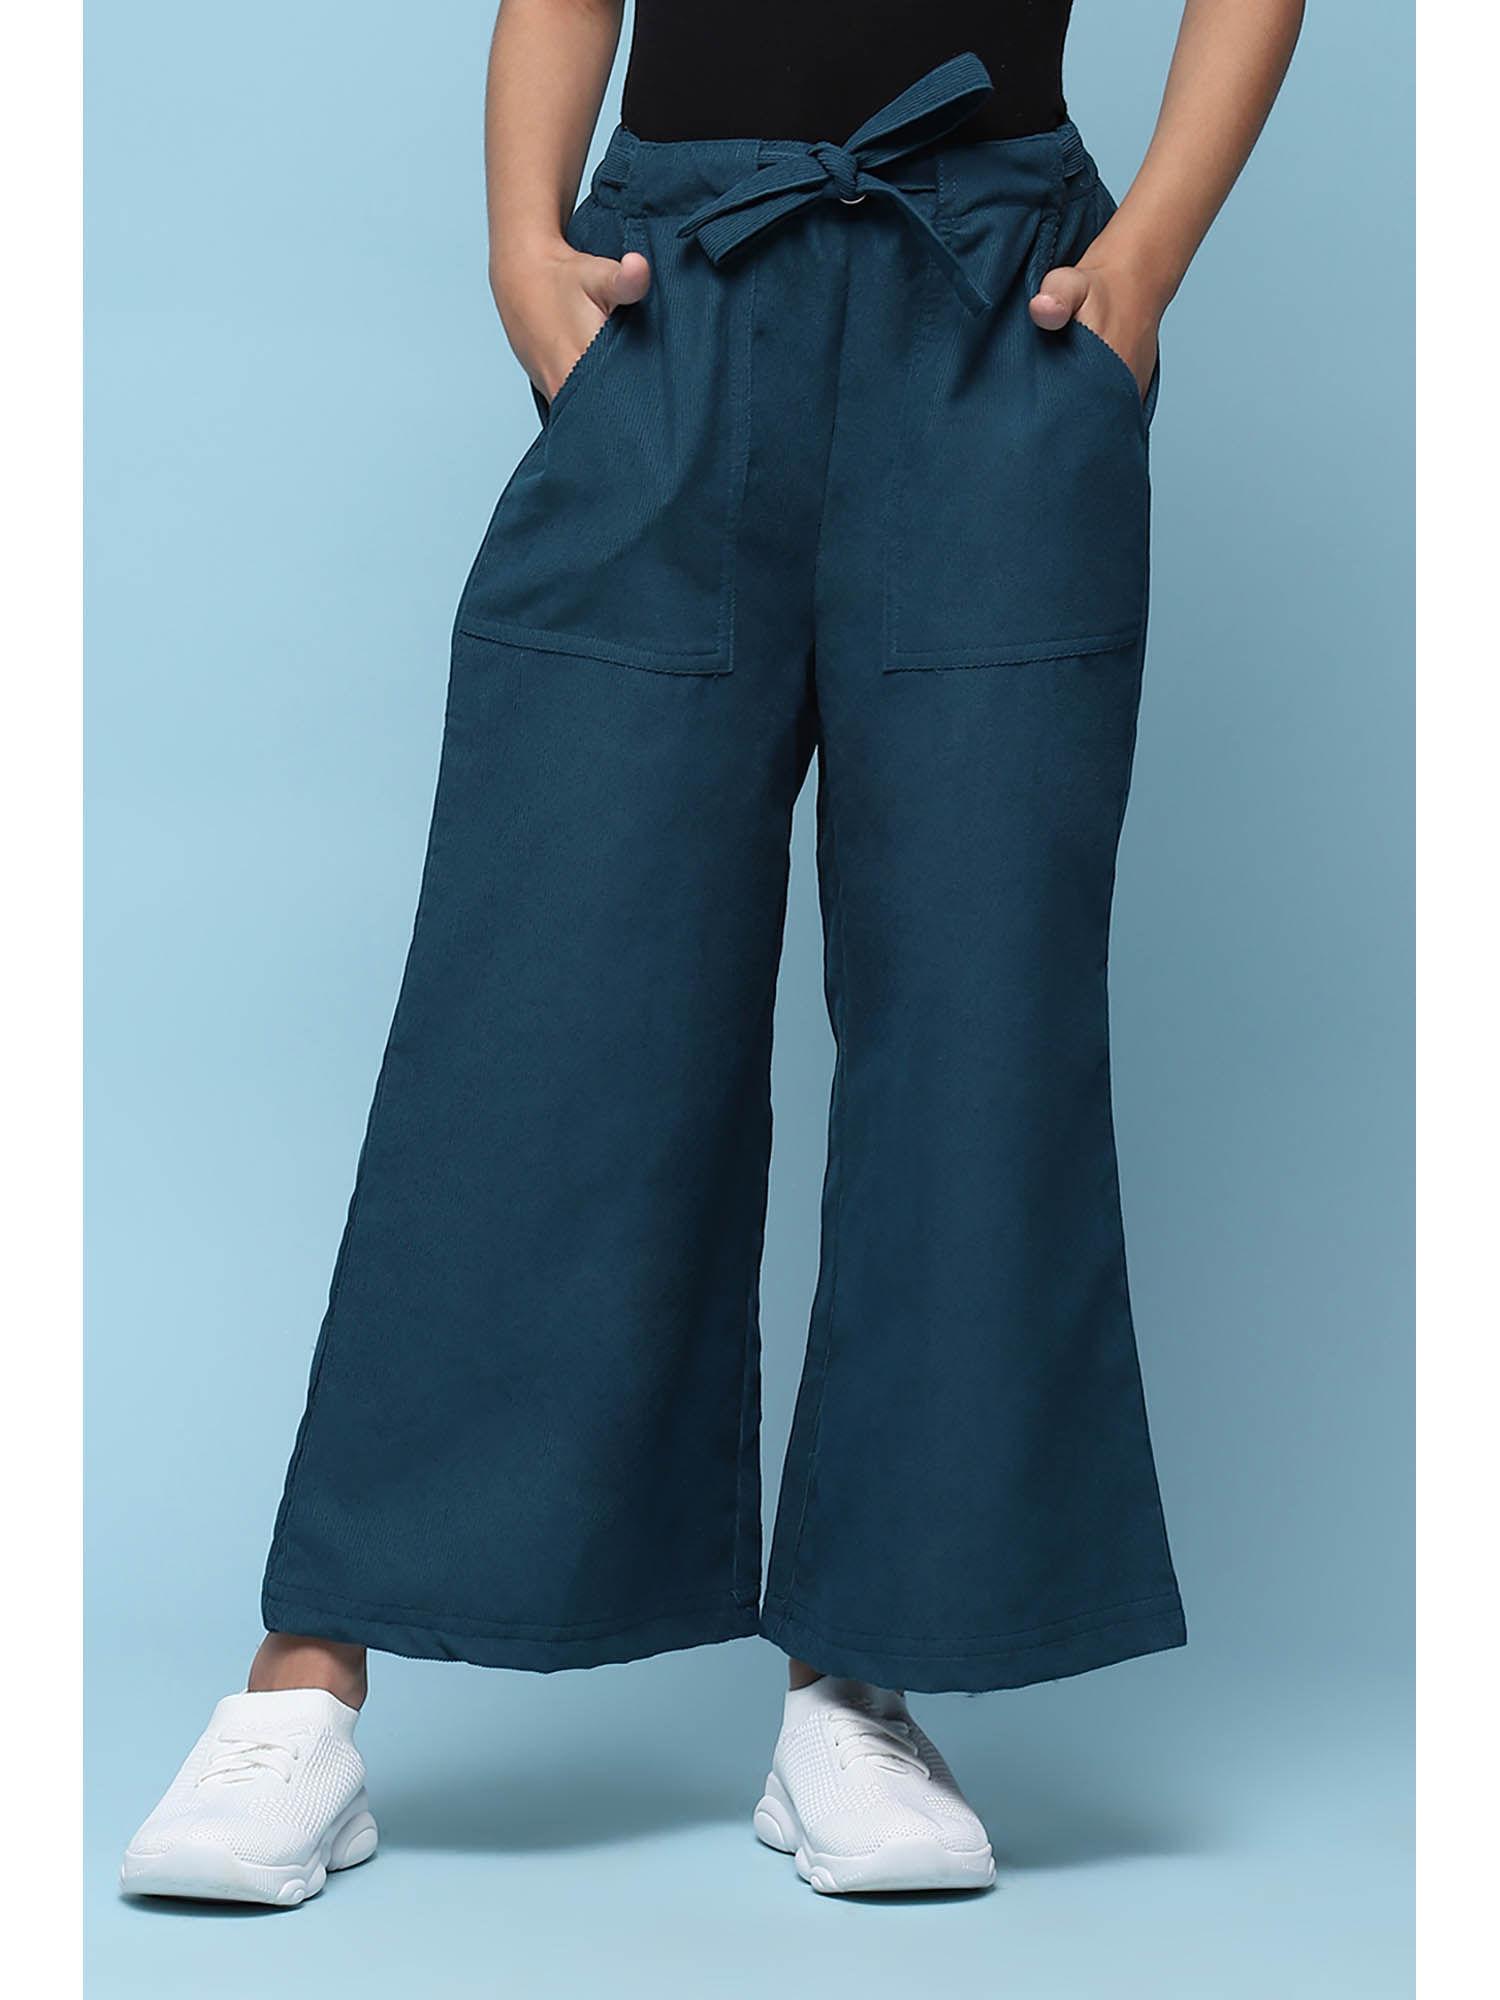 doby teal solid pant